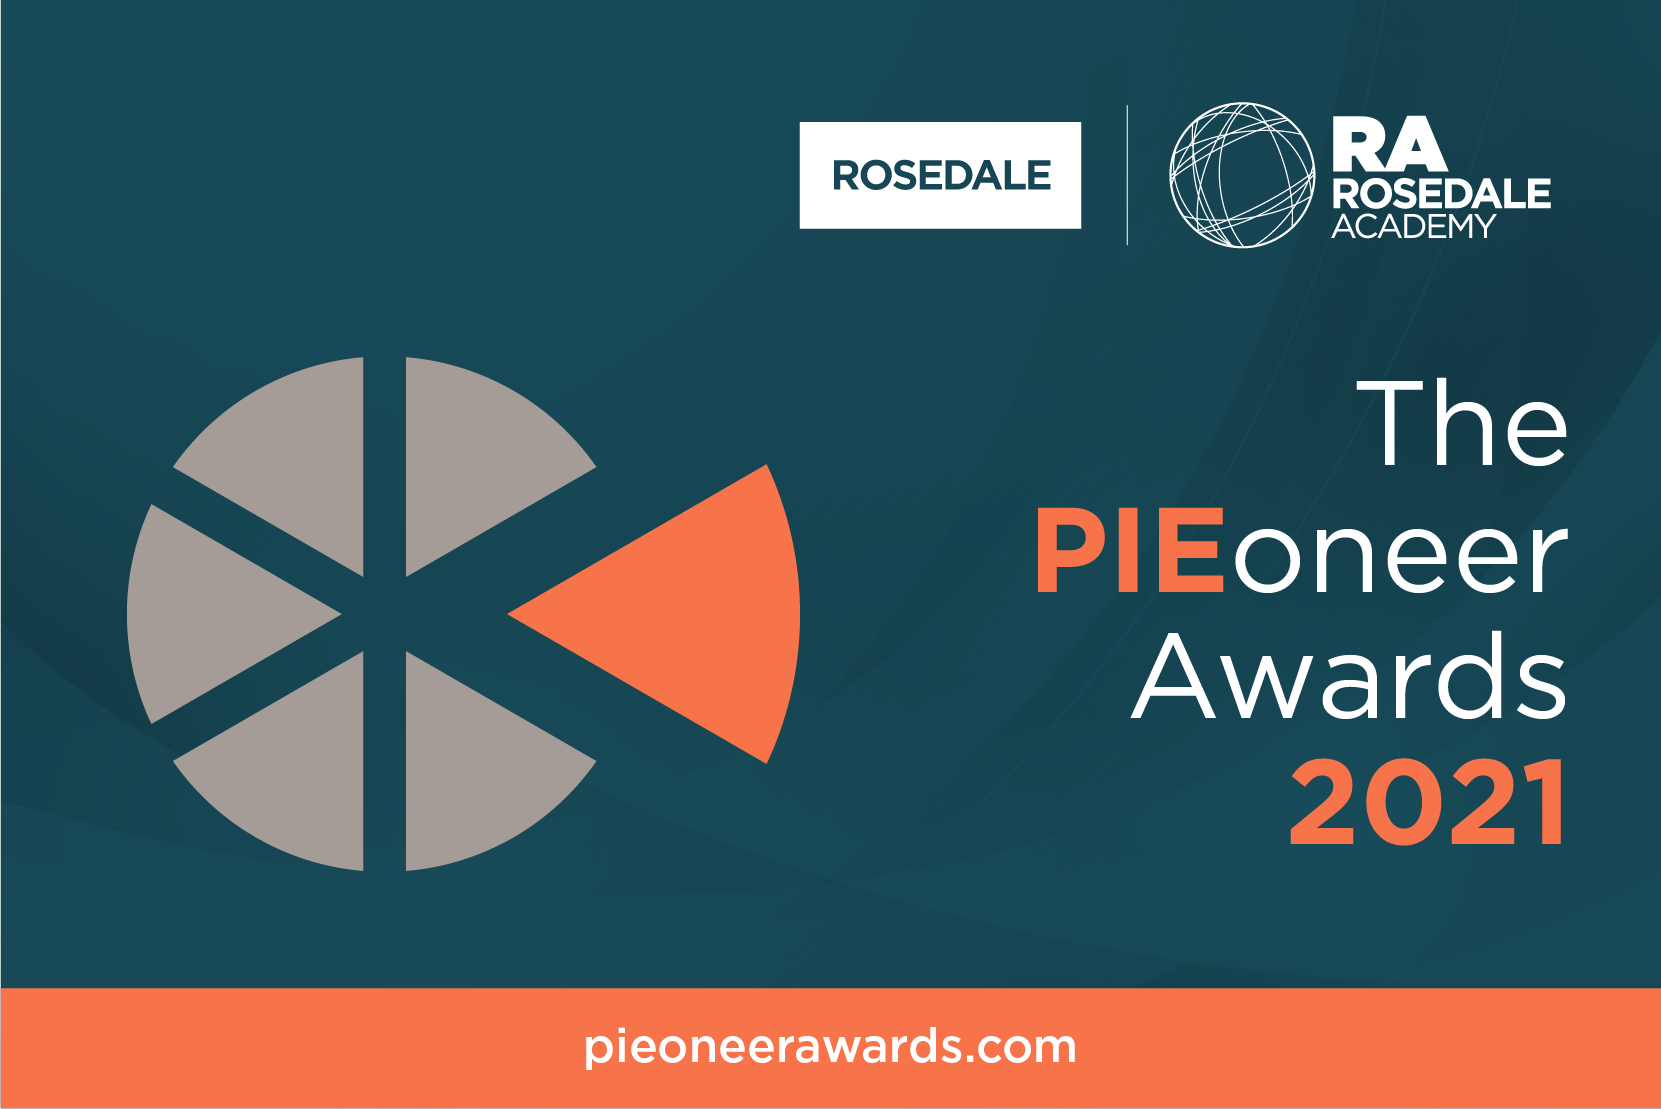 Rosedale named Highly Commended in Secondary Learning International Impact Award at the 2021 PIEoneer Awards